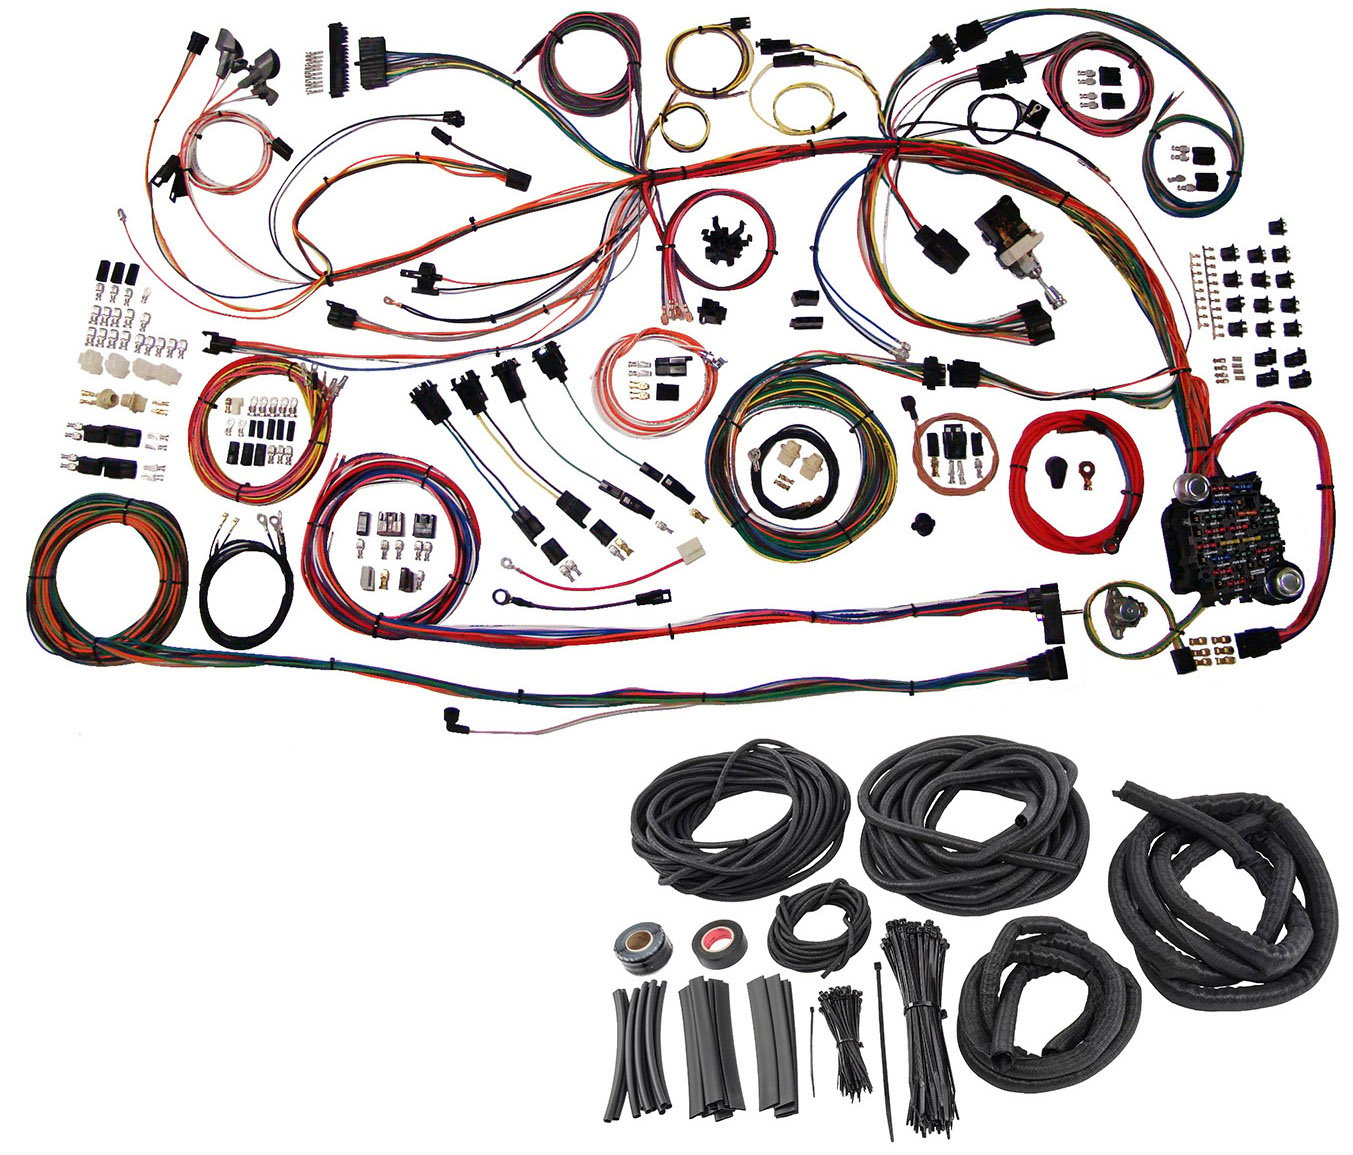 Harness & Braid Cover Kit for 1969-1972 Chevy